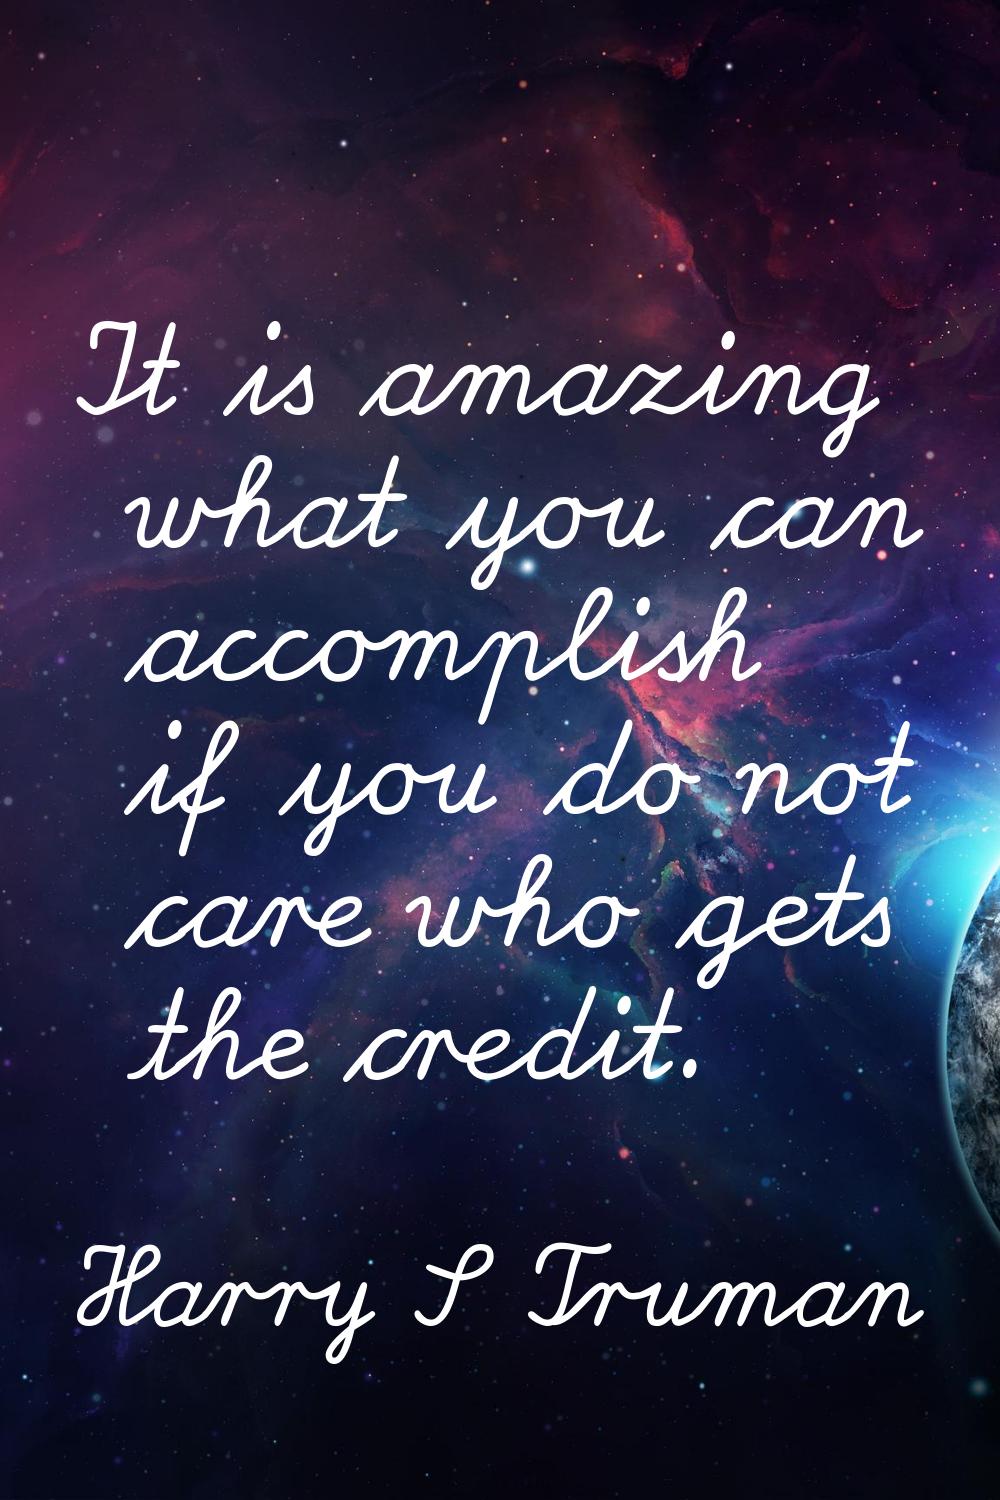 It is amazing what you can accomplish if you do not care who gets the credit.